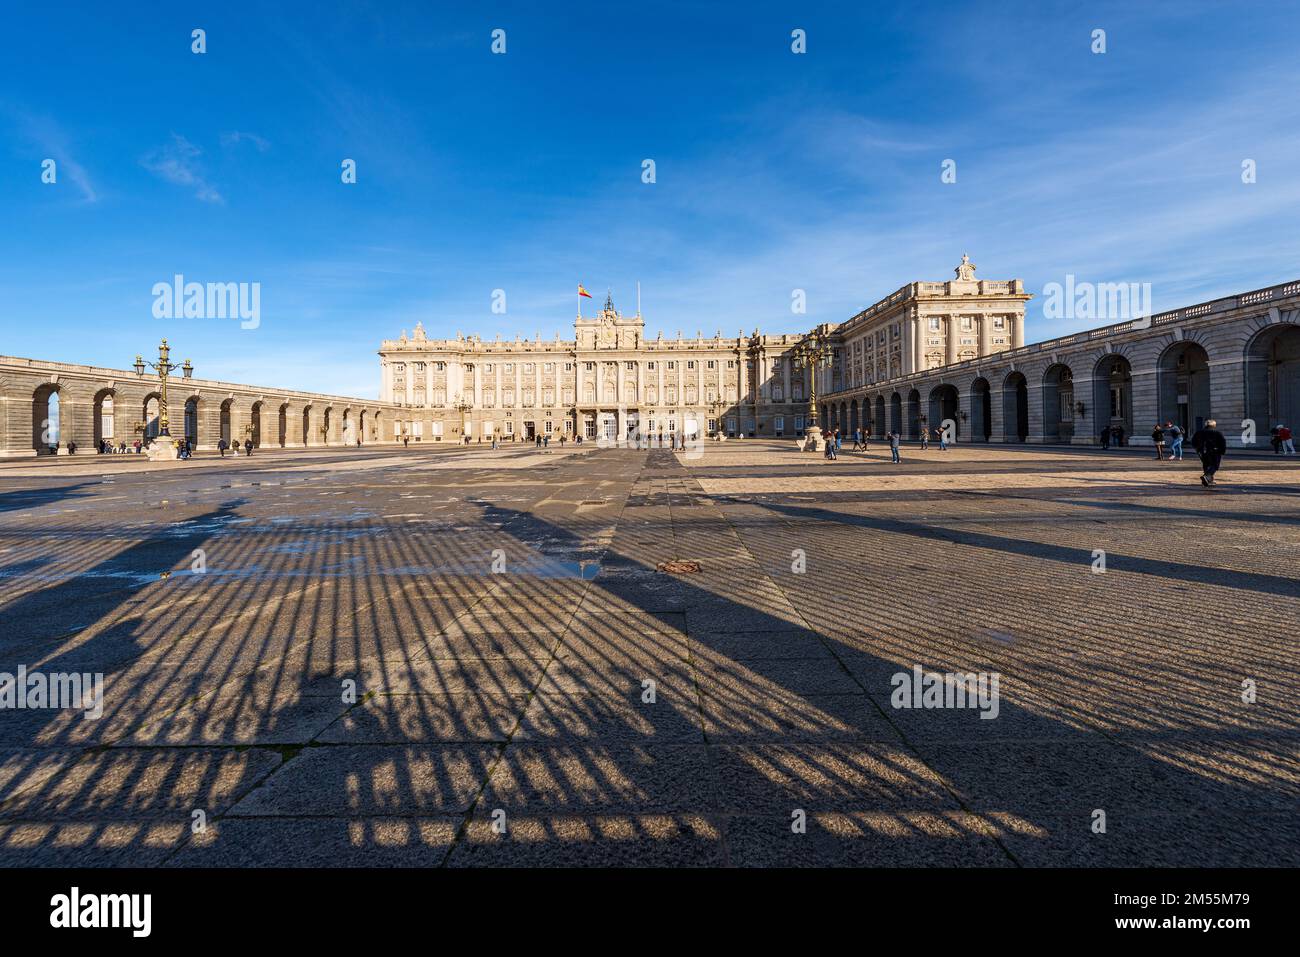 Main facade of the Madrid Royal Palace in Baroque style, in the past used as the residence of the King of Spain, Plaza de la Armeria, Spain, Europe. Stock Photo